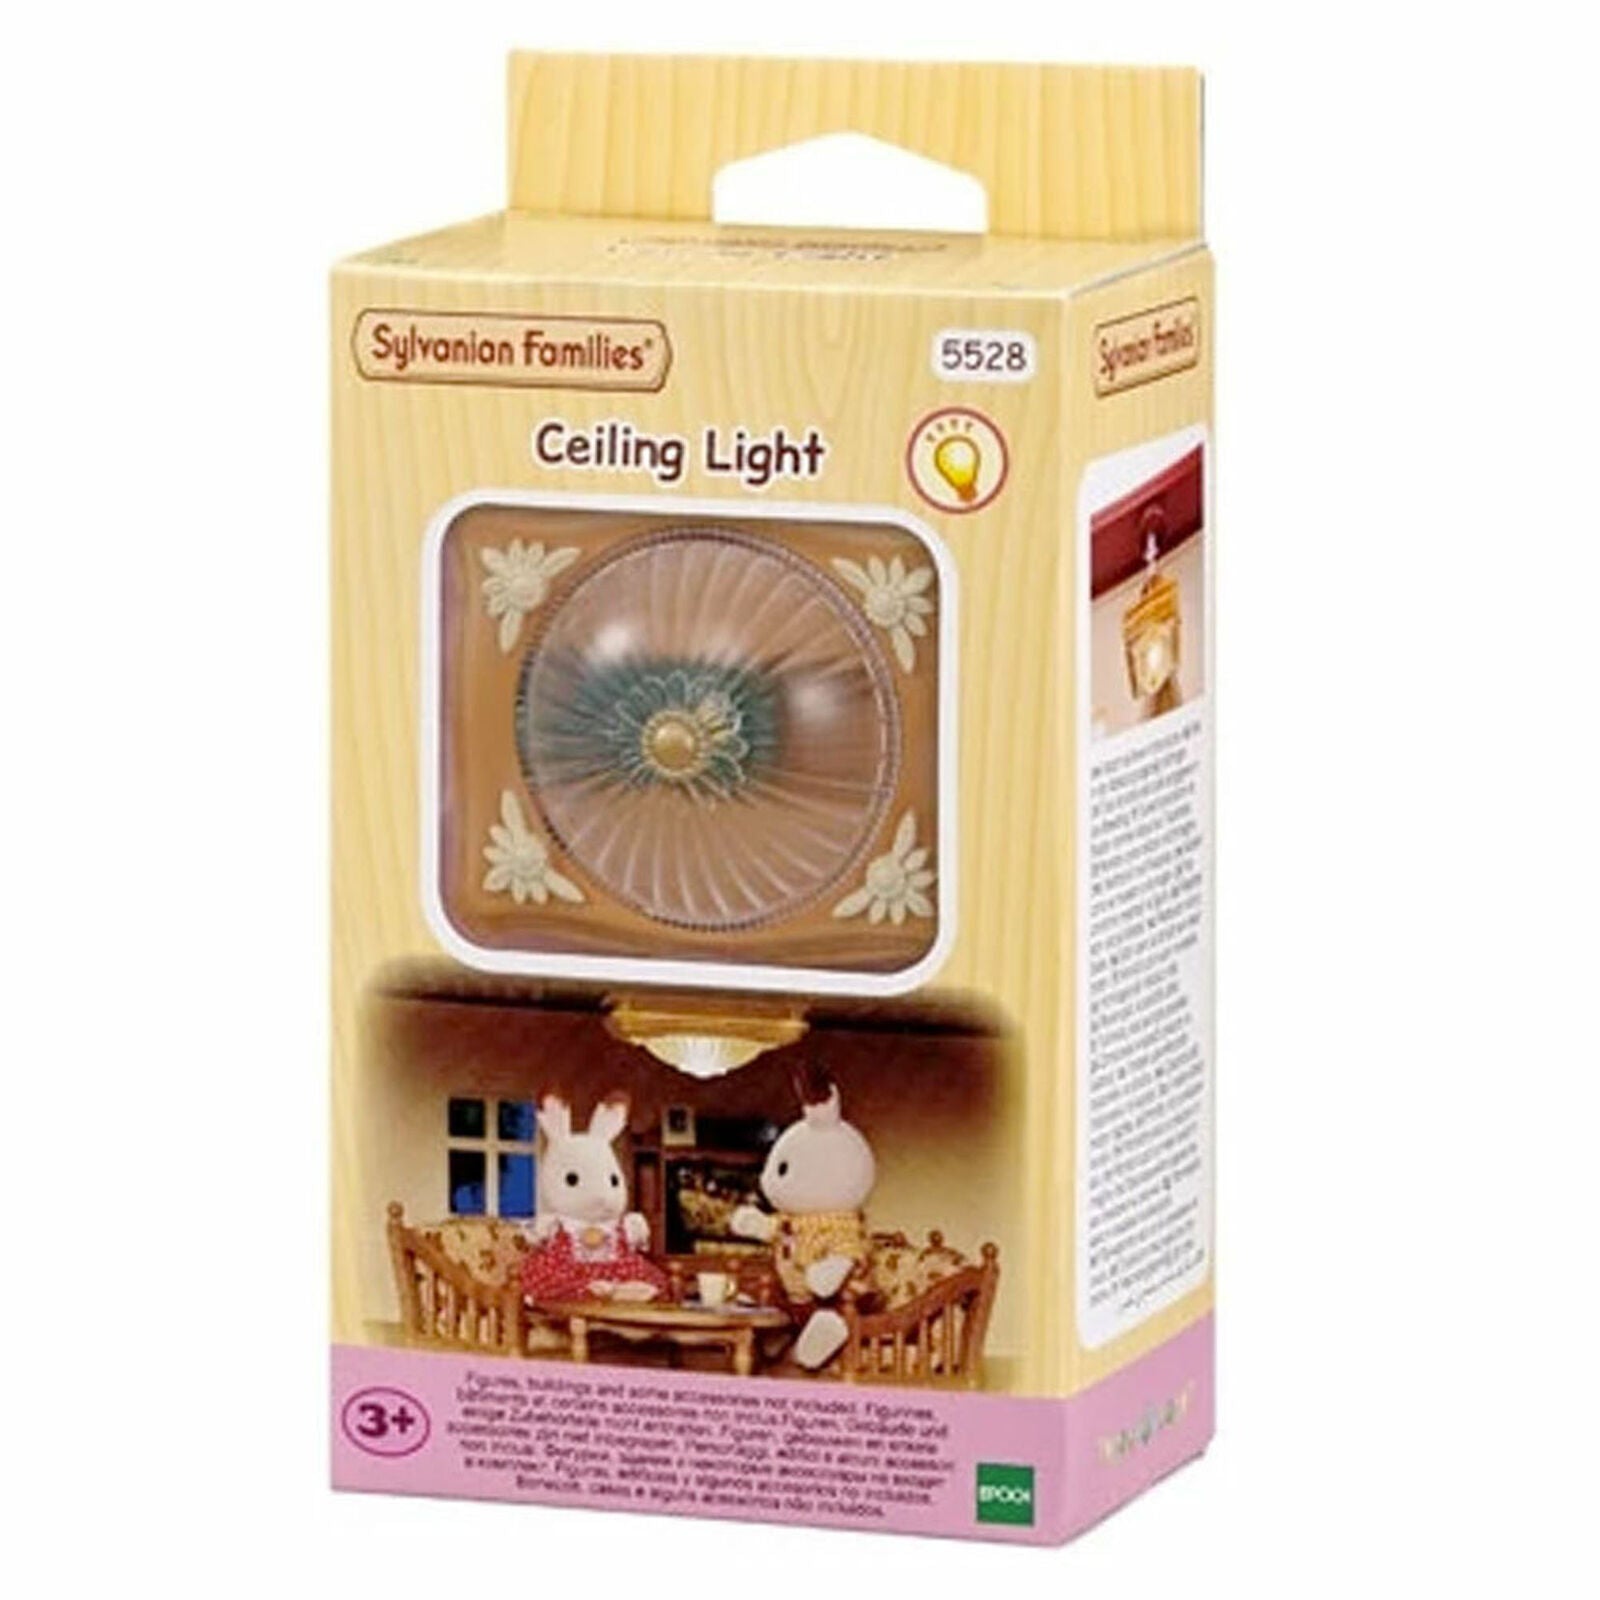 Sylvanian Families Ceiling Light Accessory Furniture Set 5528 Role Play Age 3+